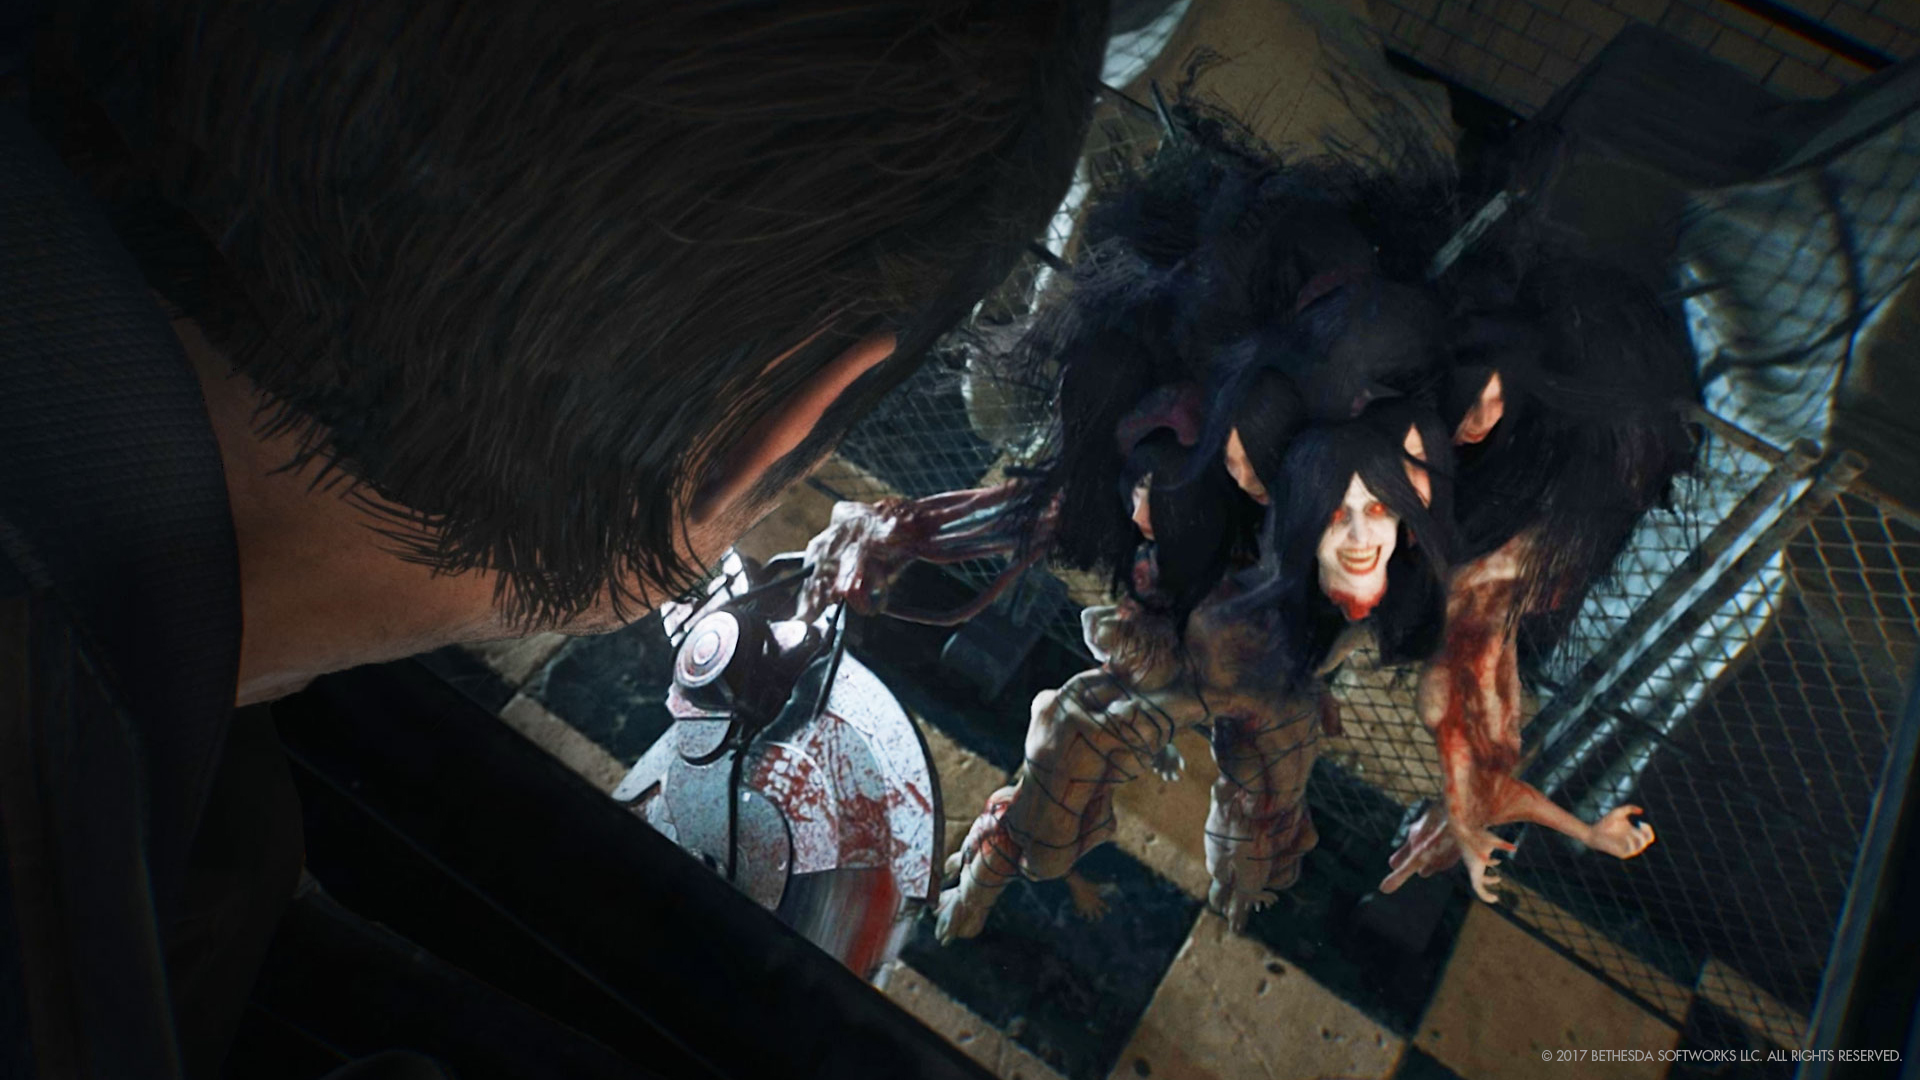 Reliving The Evil Within - An Interview With Shinji Mikami, John Johanas, And Trent Haaga